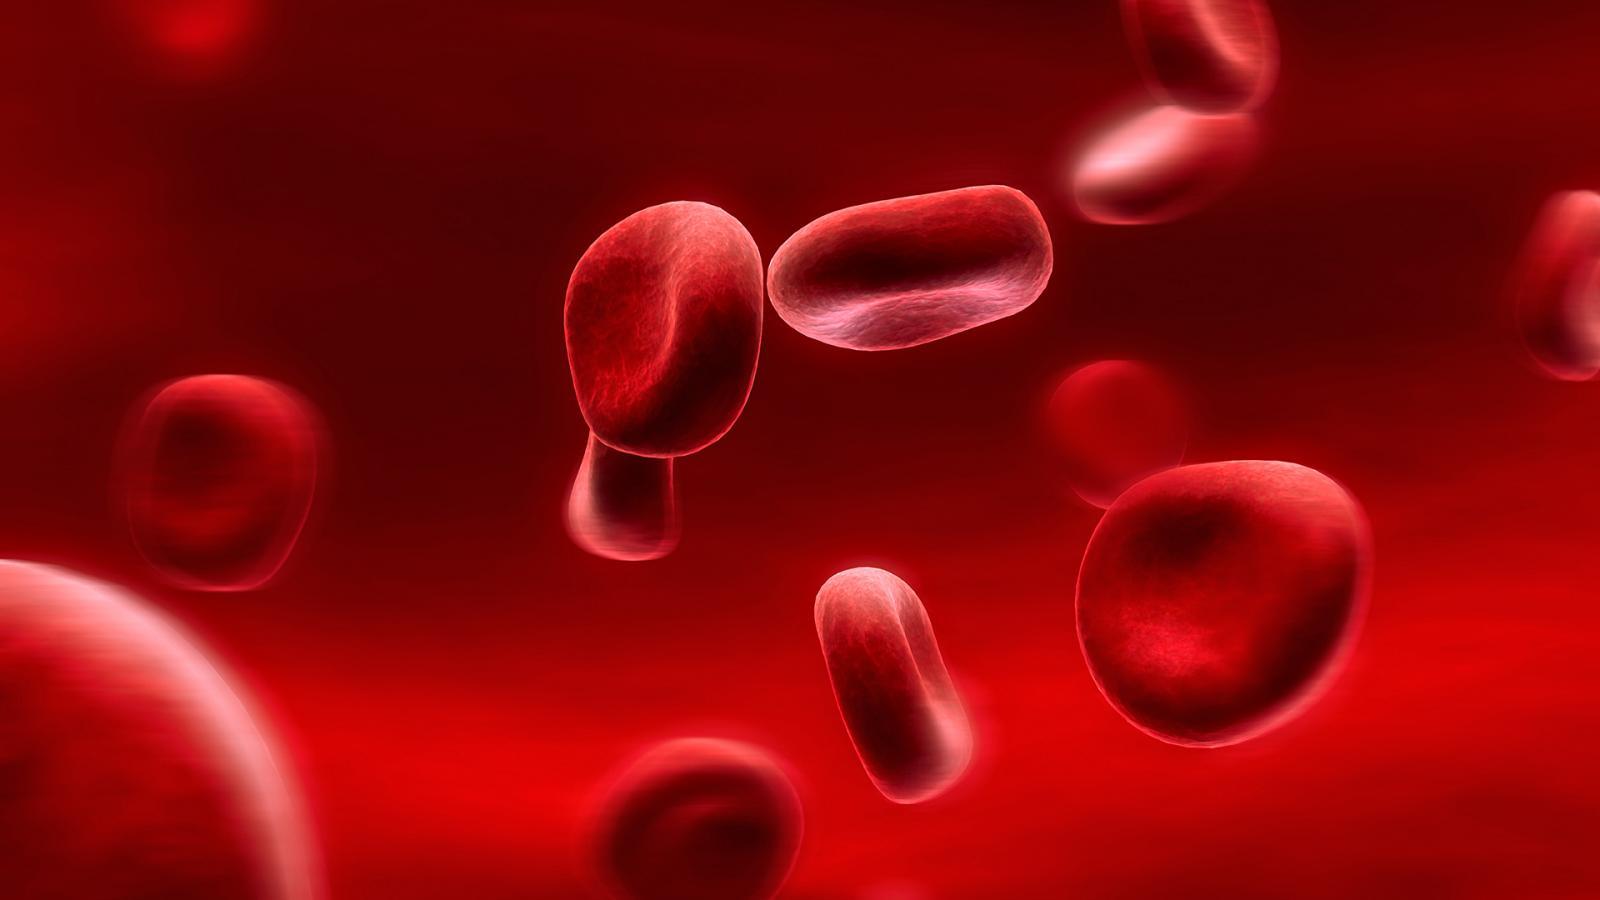 Microscopic Red Blood Cells Wallpaper by HD Wallpaper Daily